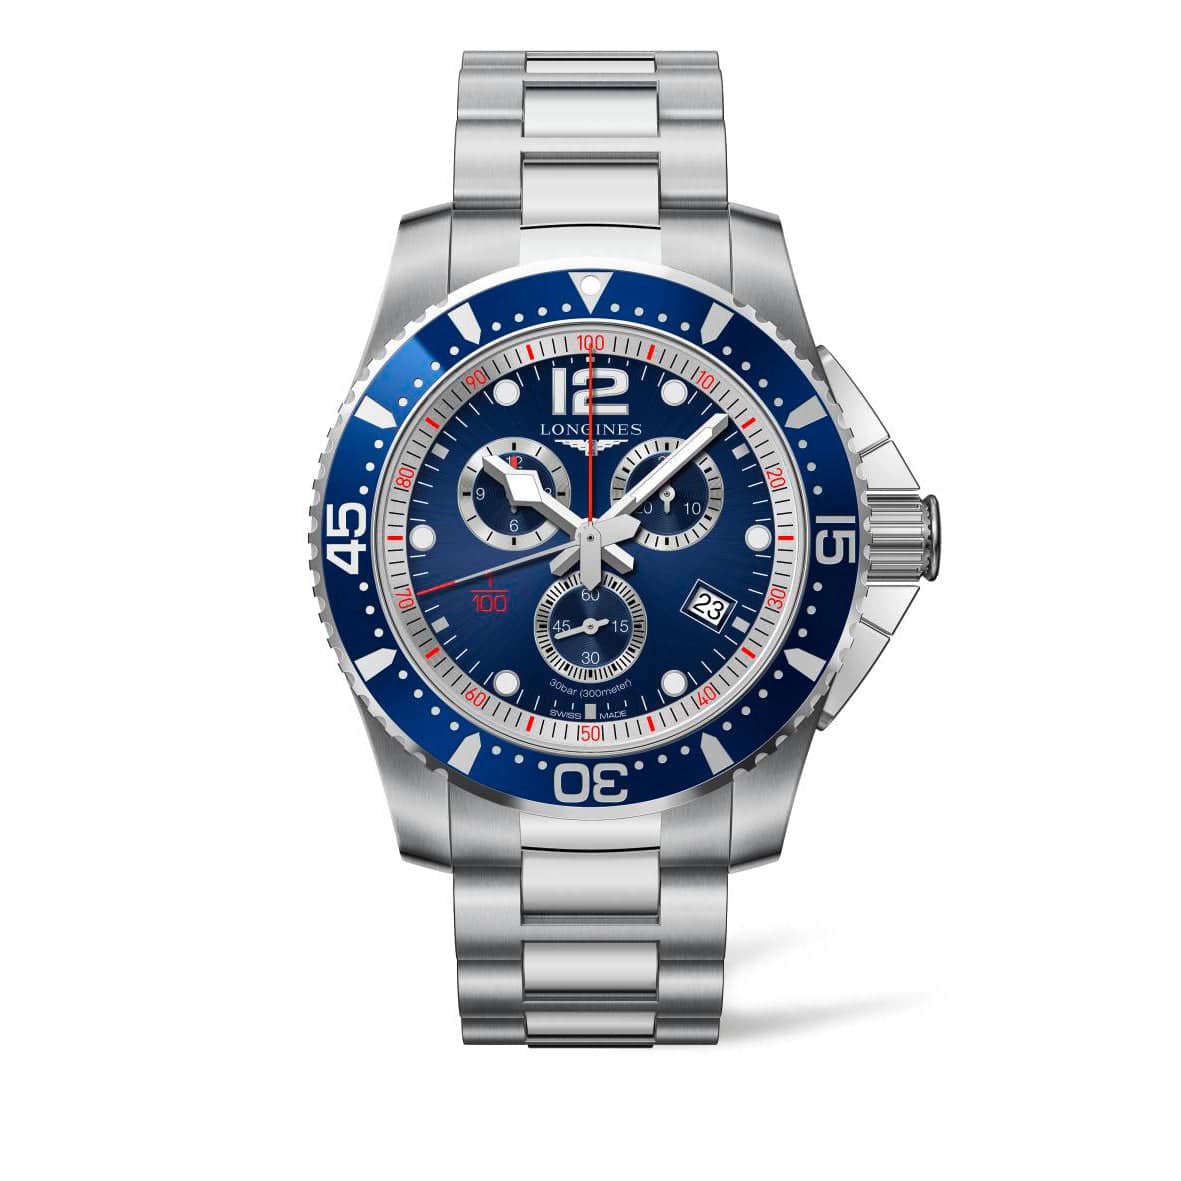 HydroConquest 47mm Chronograph, Long's Jewelers